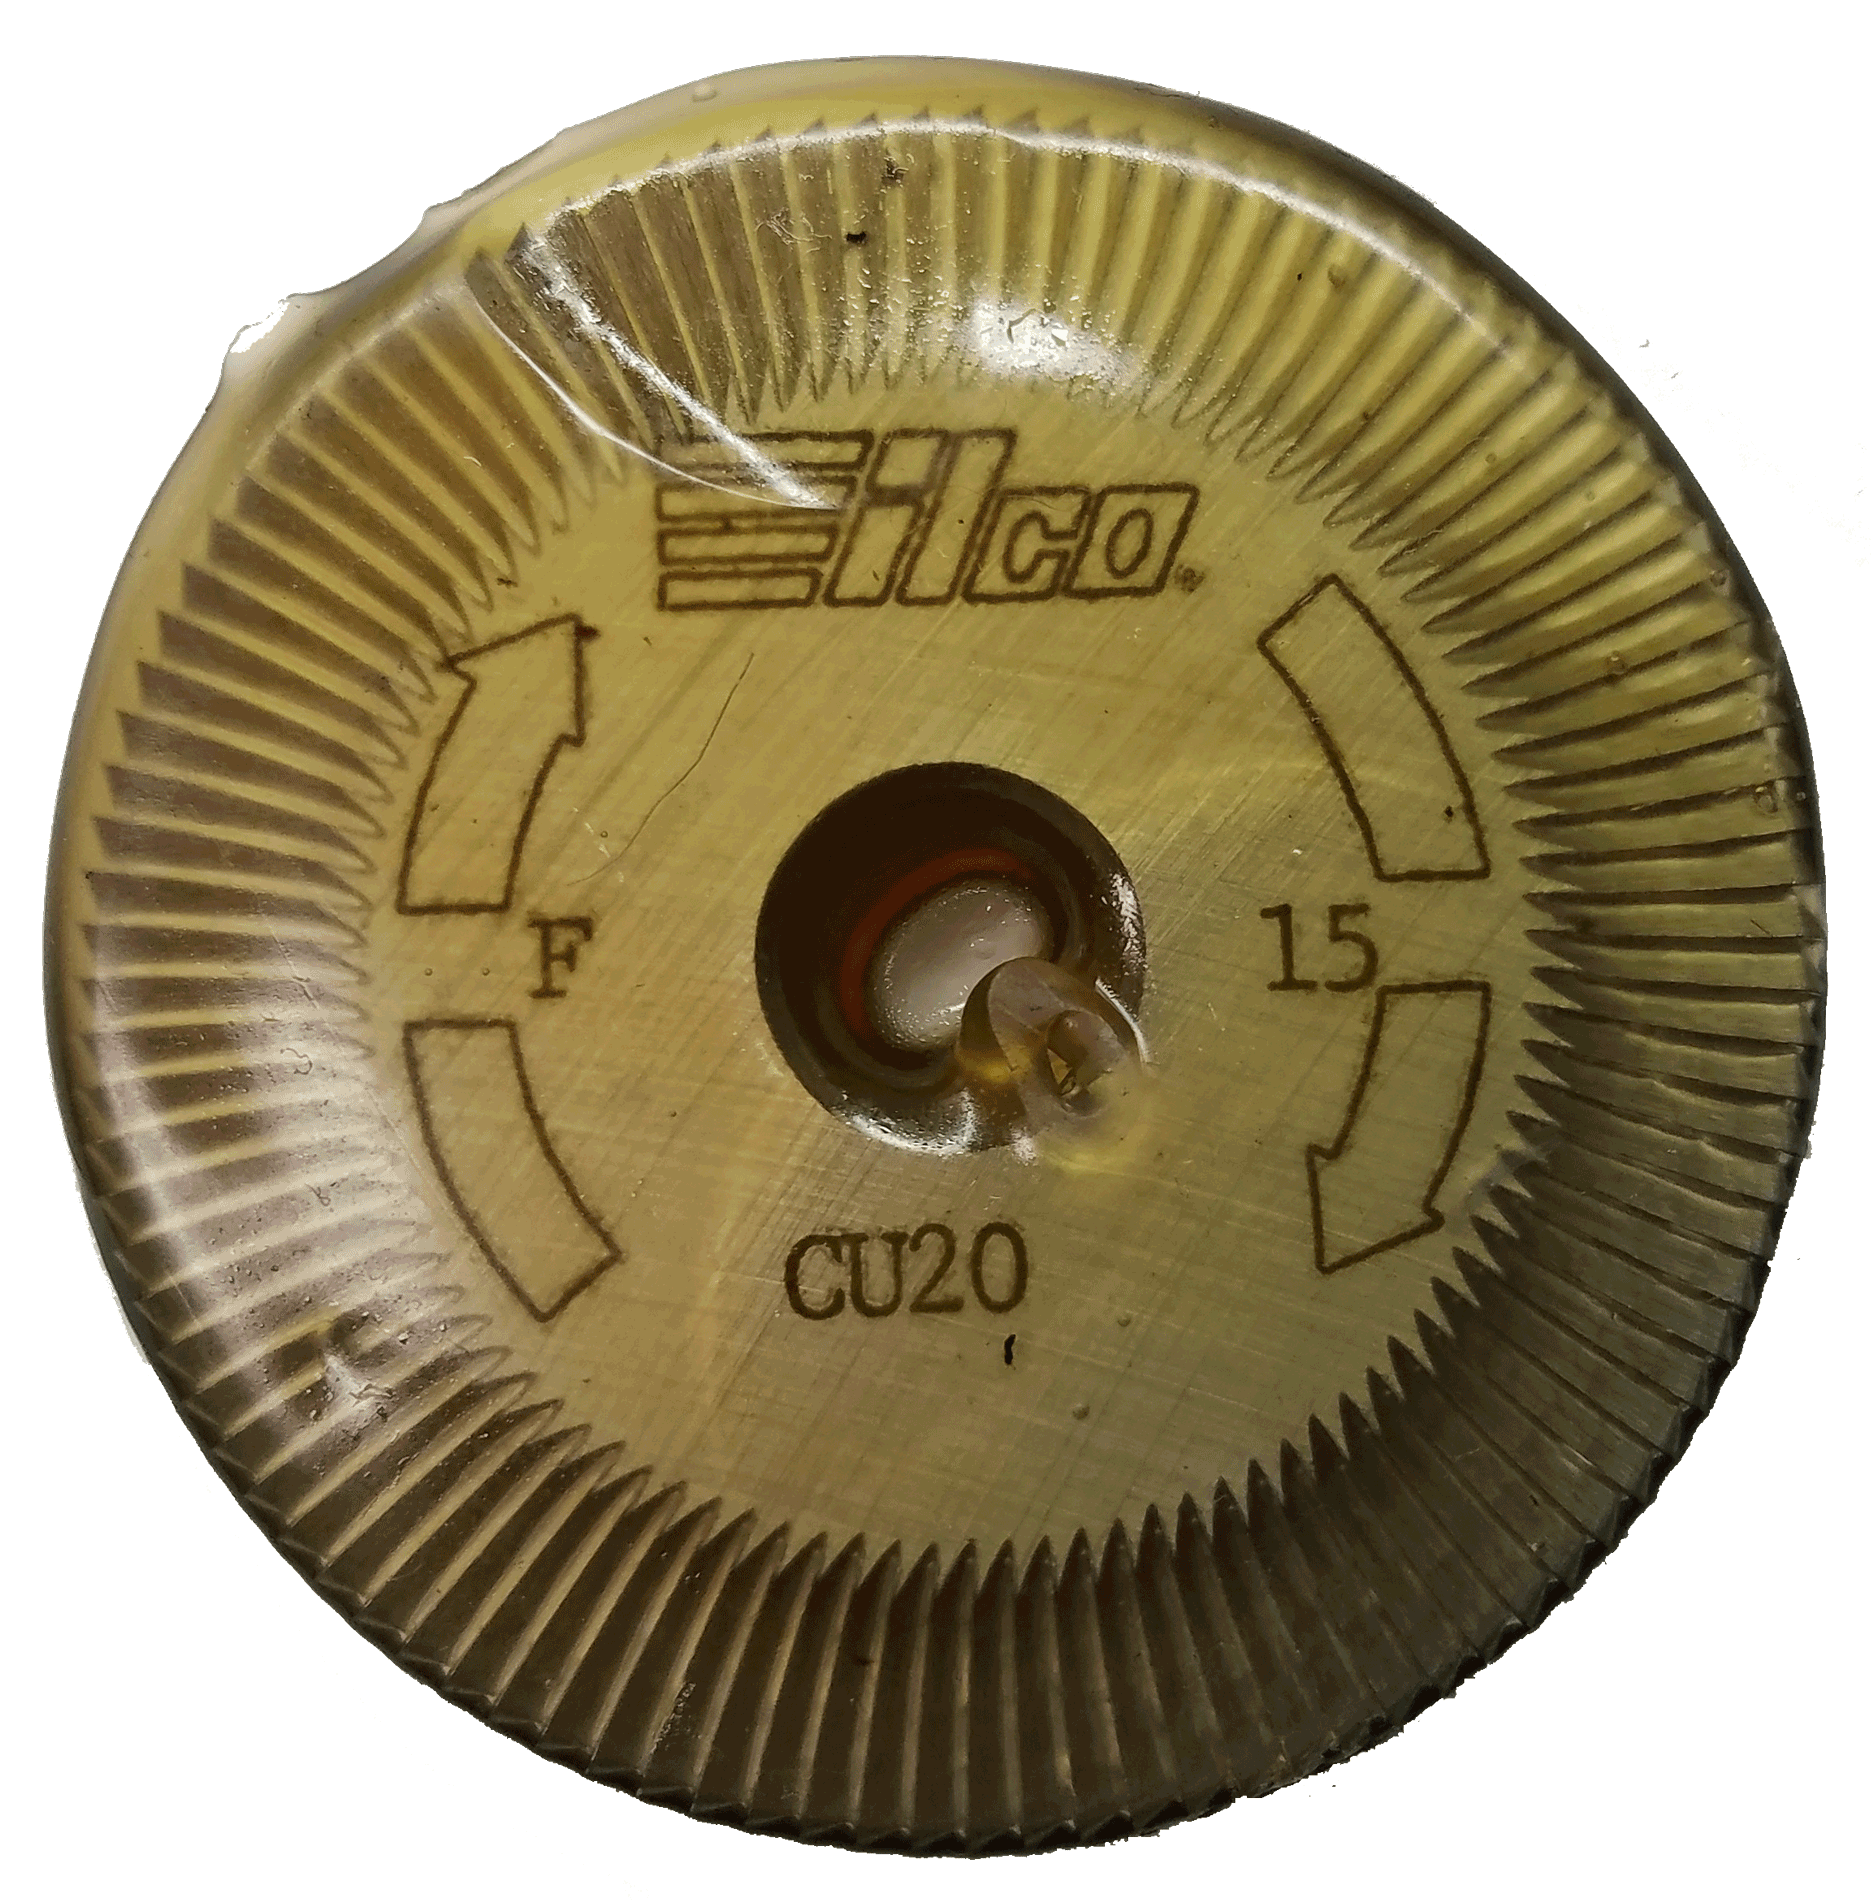 CU20 Cutting Wheel for Ilco 024 machines Good Used Ilco Uncan Blade CUTTER 